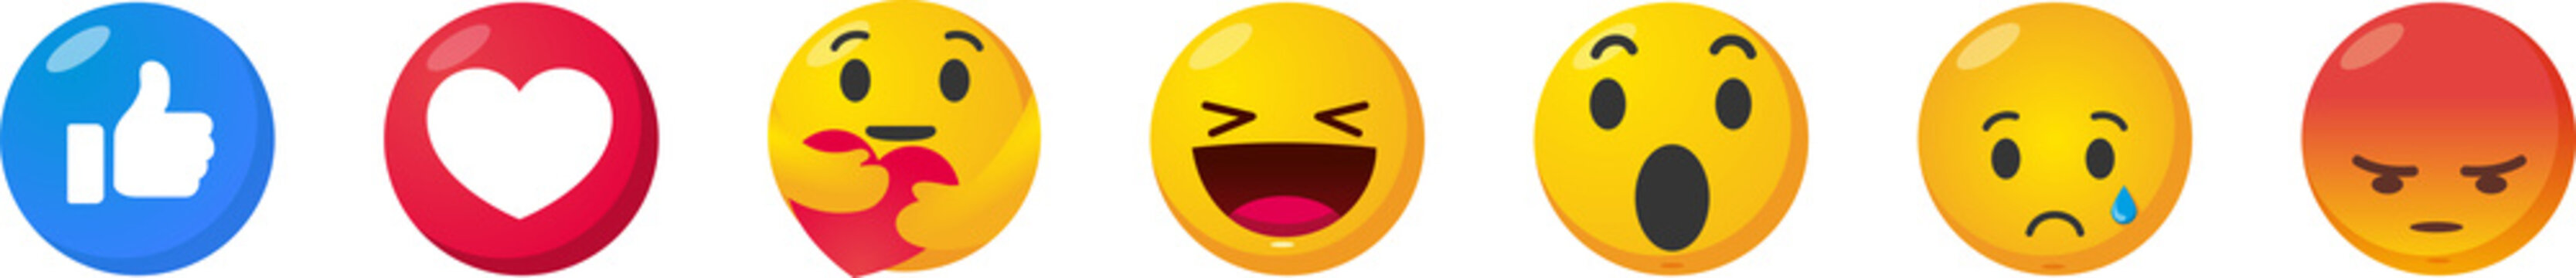 Facebook emoticon buttons. Png. Collection of Emoji Reactions for Social Network. 